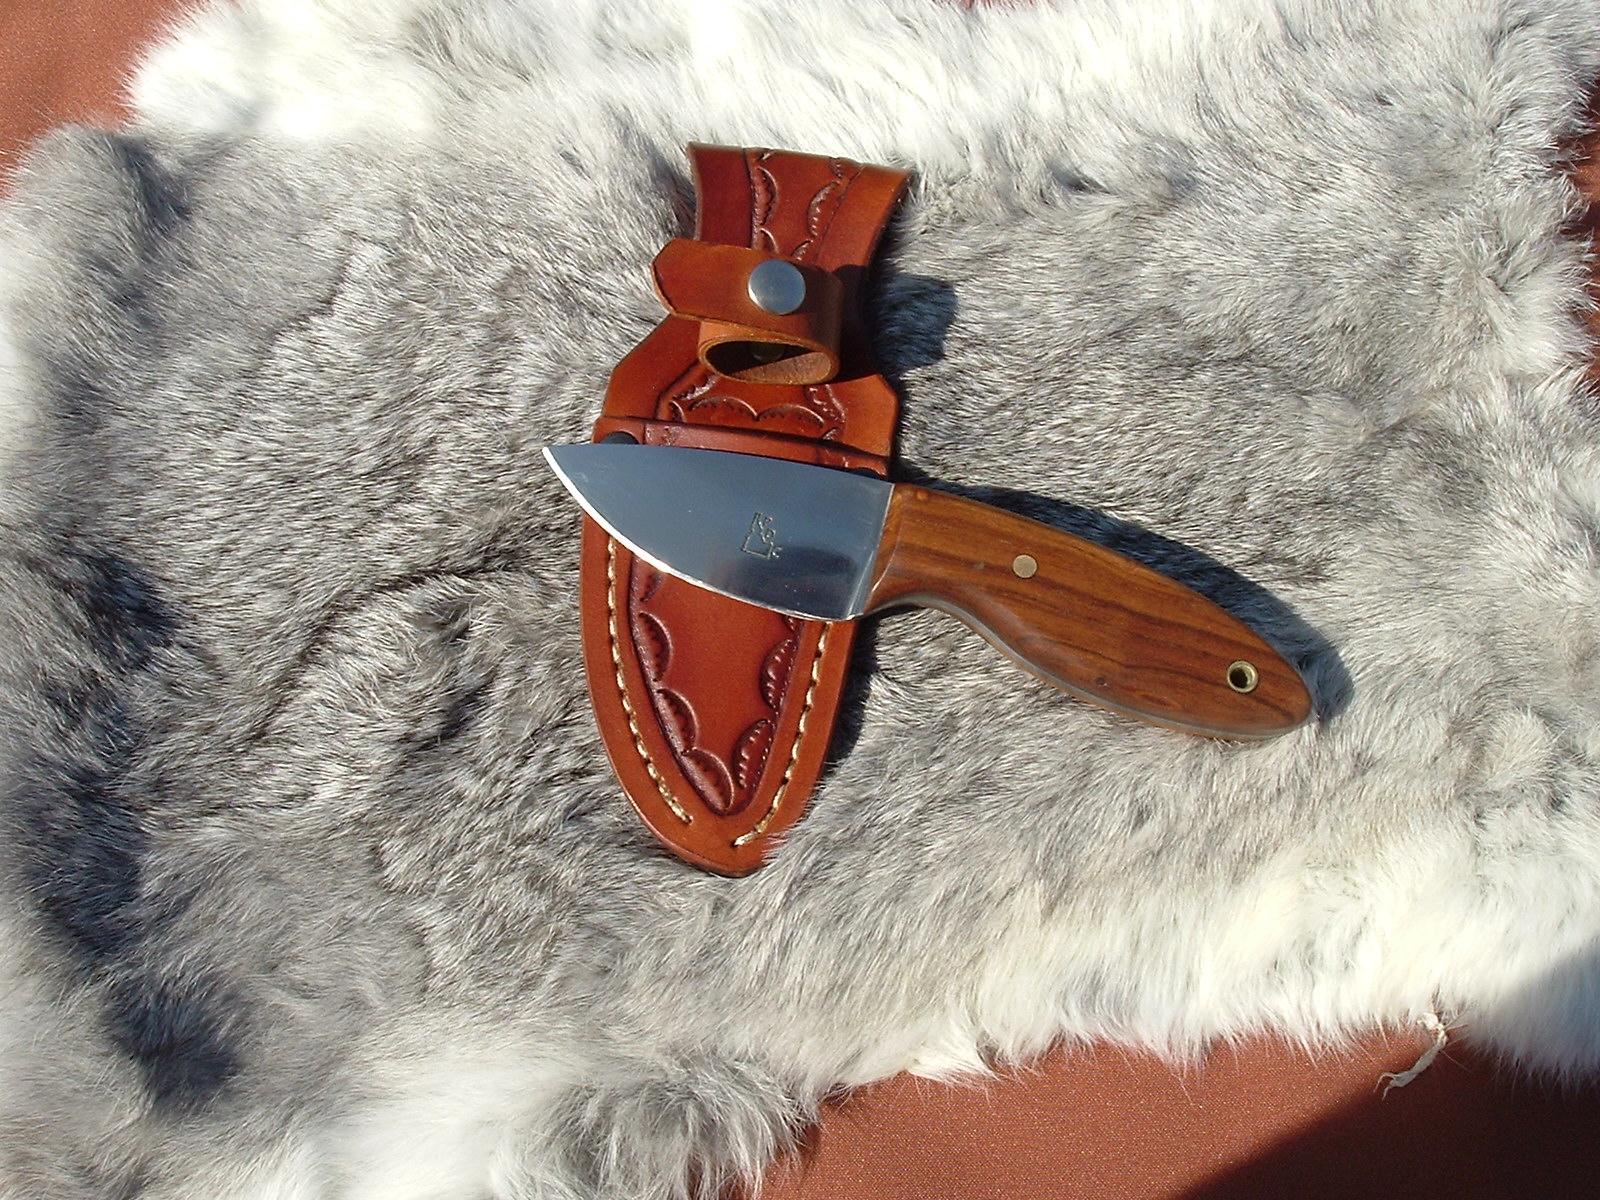 A small knife laying on a brown leather sheath, with a gray fur backdrop